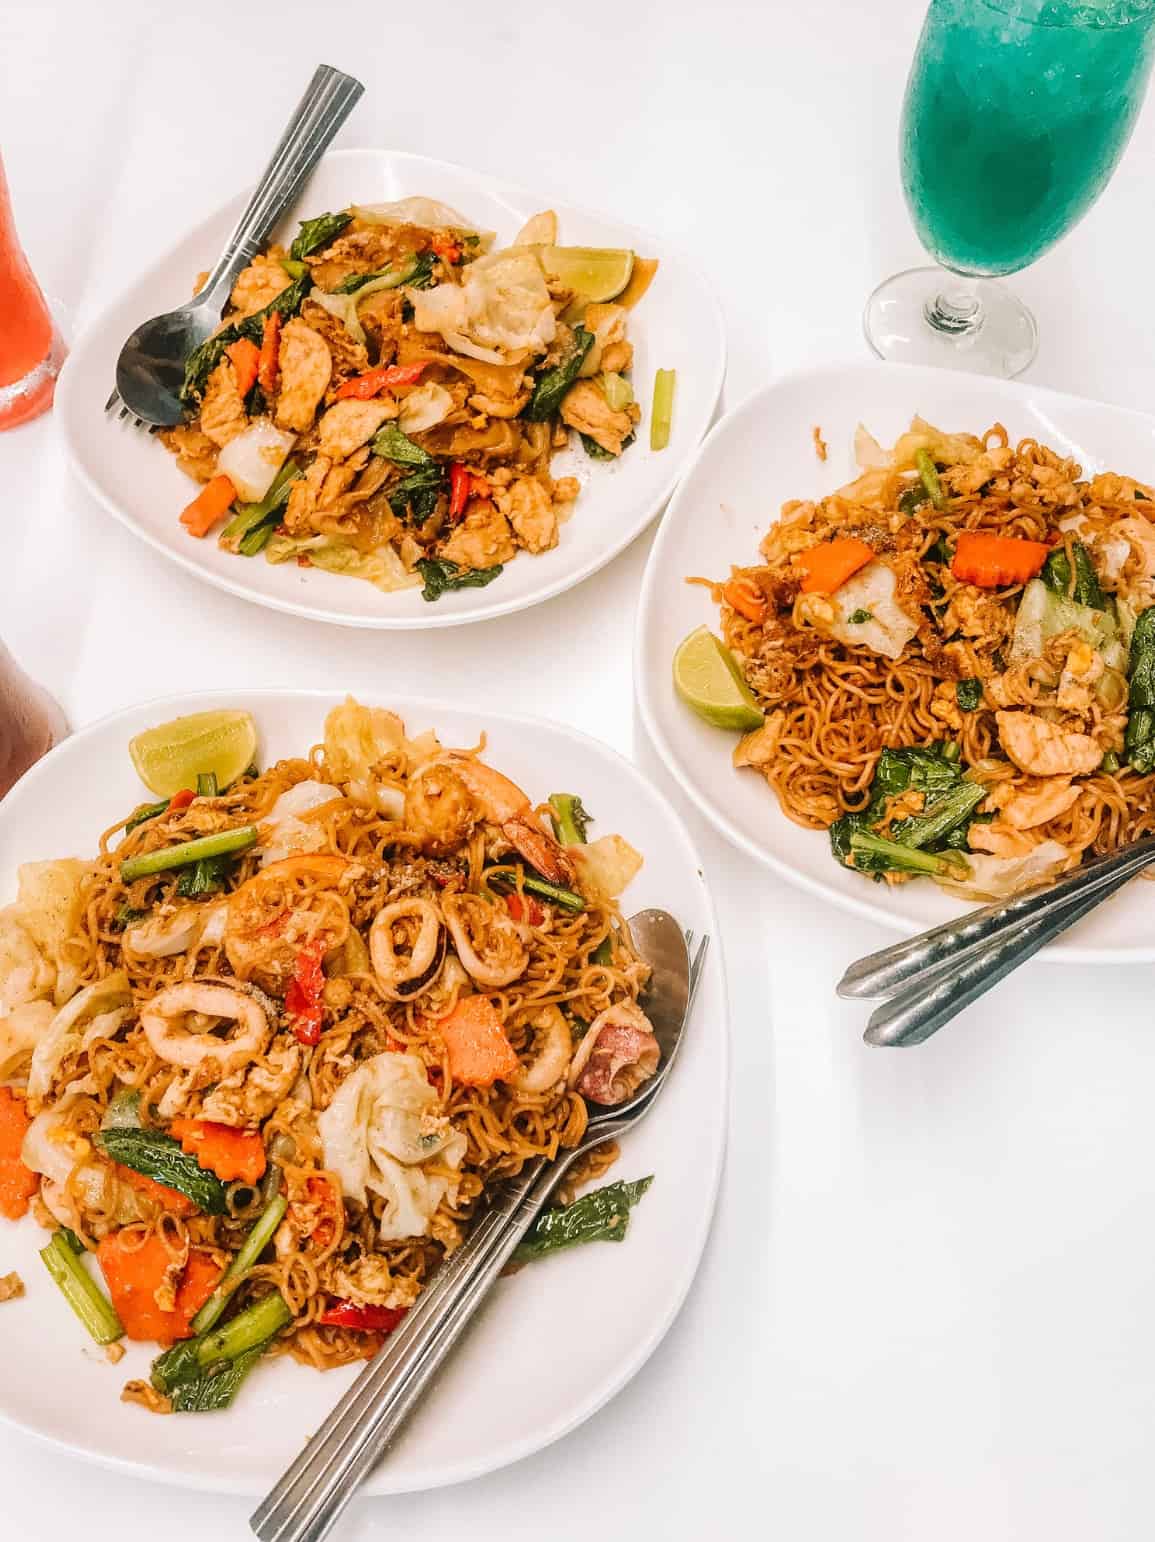 Fried rice and stir-fried noodle dishes from the Beyond Night Market in Patong Beach